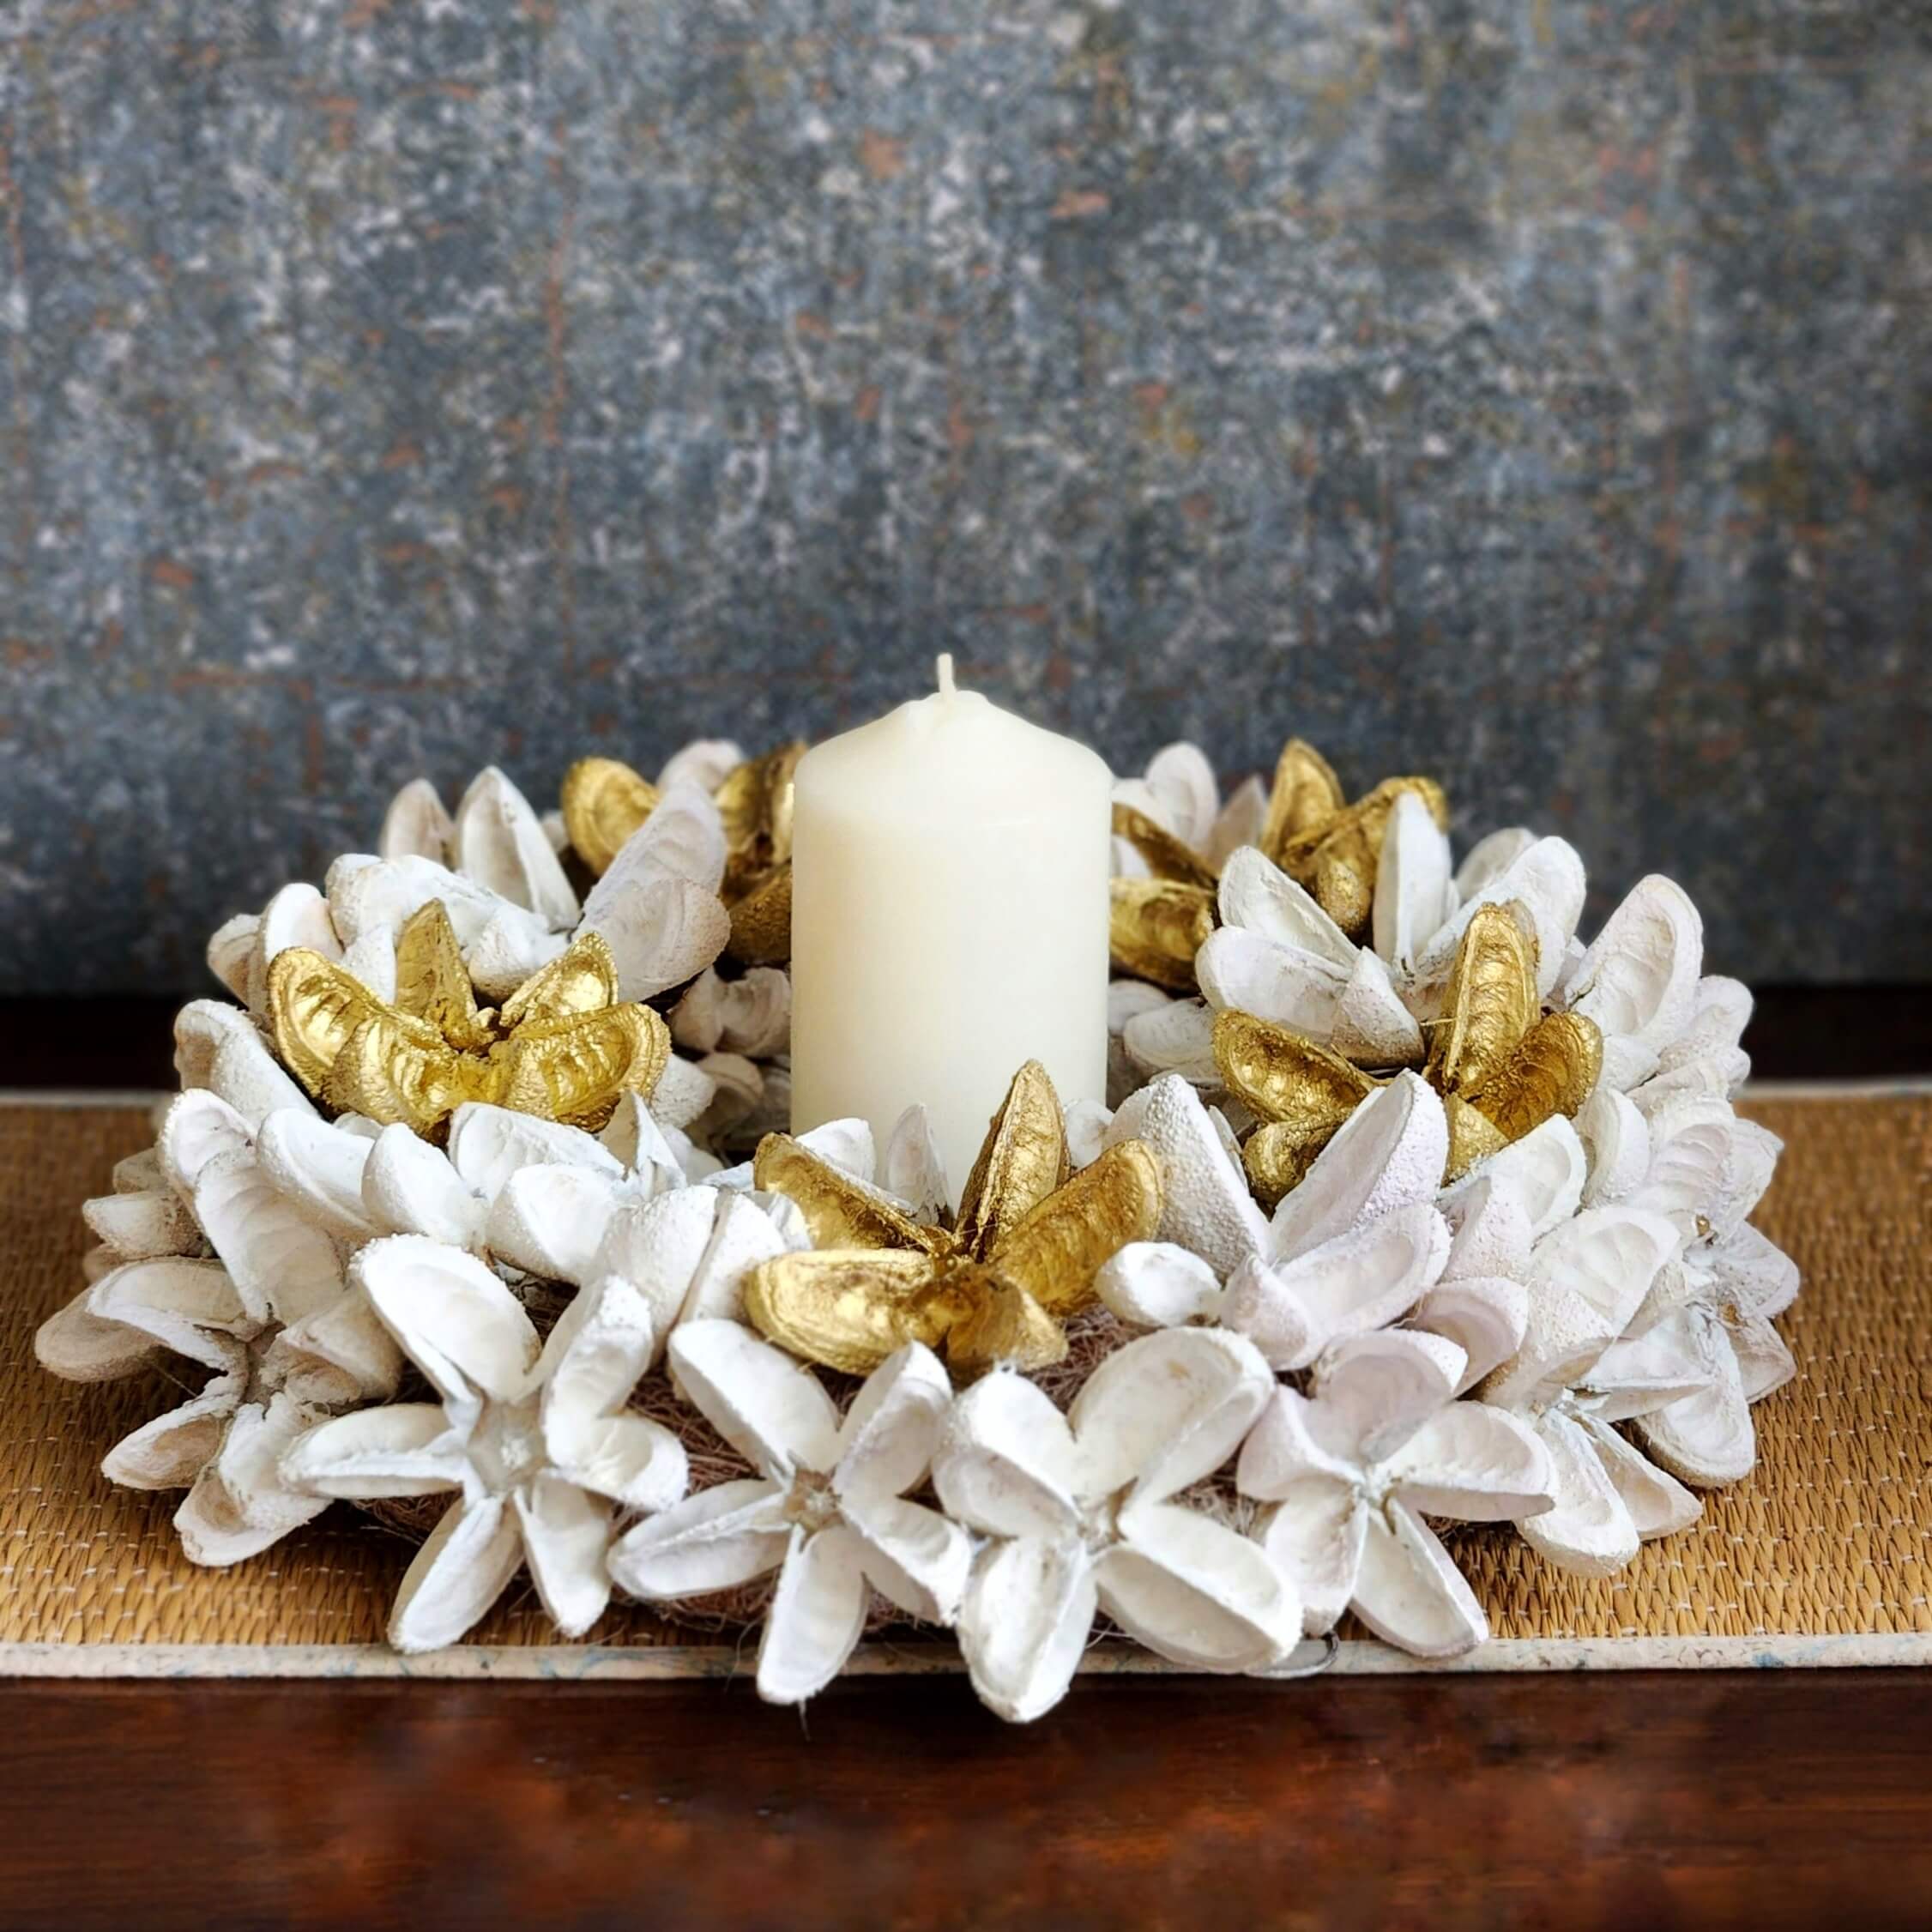 Timeless White & Gold Floral Centrepiece